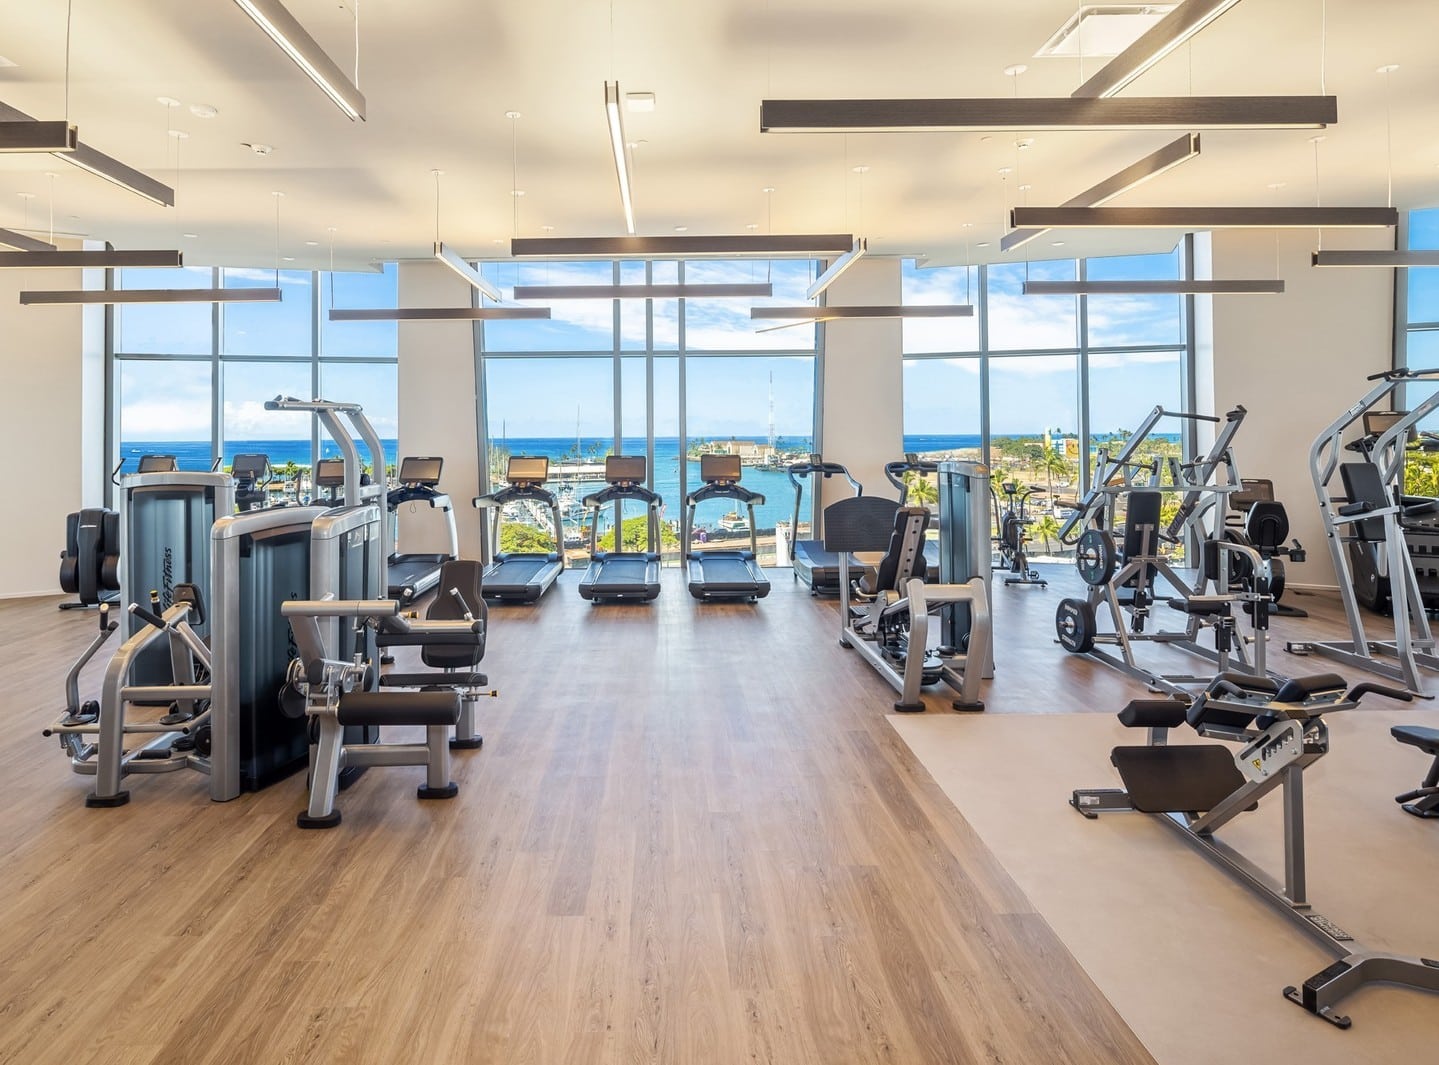 Discover Kōʻula's indoor fitness center, where your workout is framed by sweeping ocean views, while a dedicated outdoor fitness pavilion allows you to enjoy the trade winds. Learn more about Kōʻula's amenity spaces at the link in our bio.